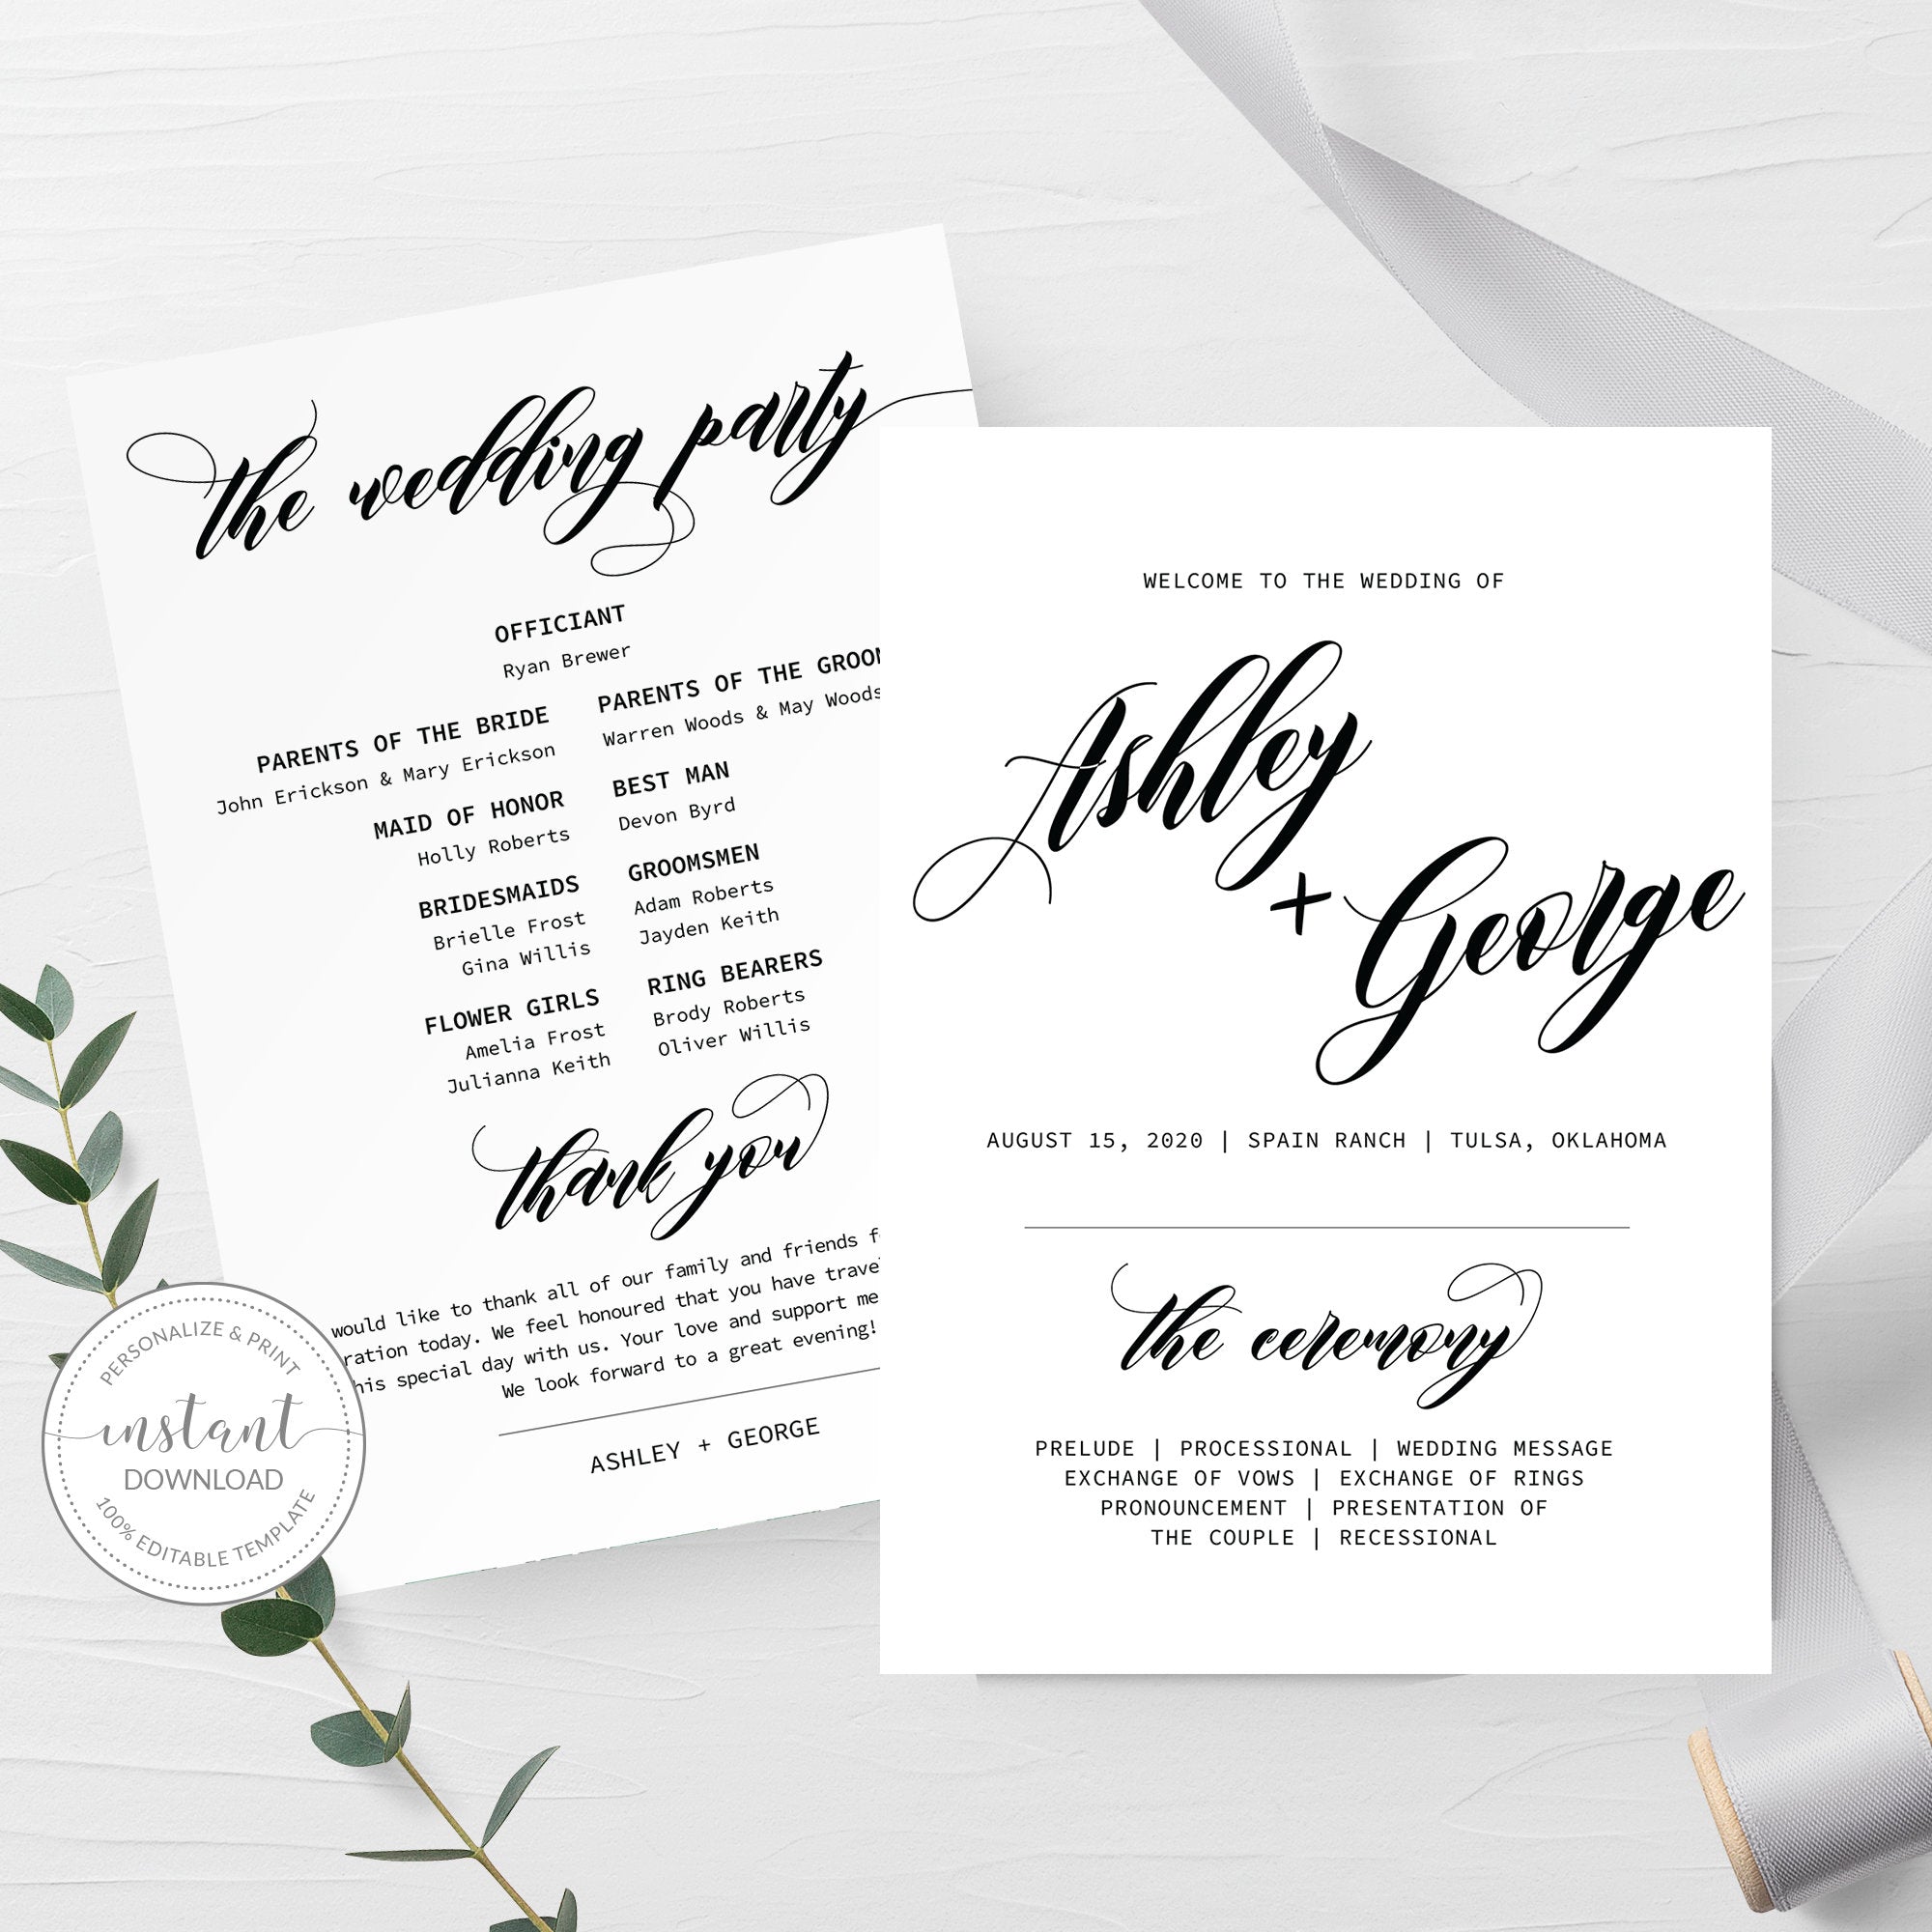 wedding-ceremony-program-template-free-download-for-your-needs